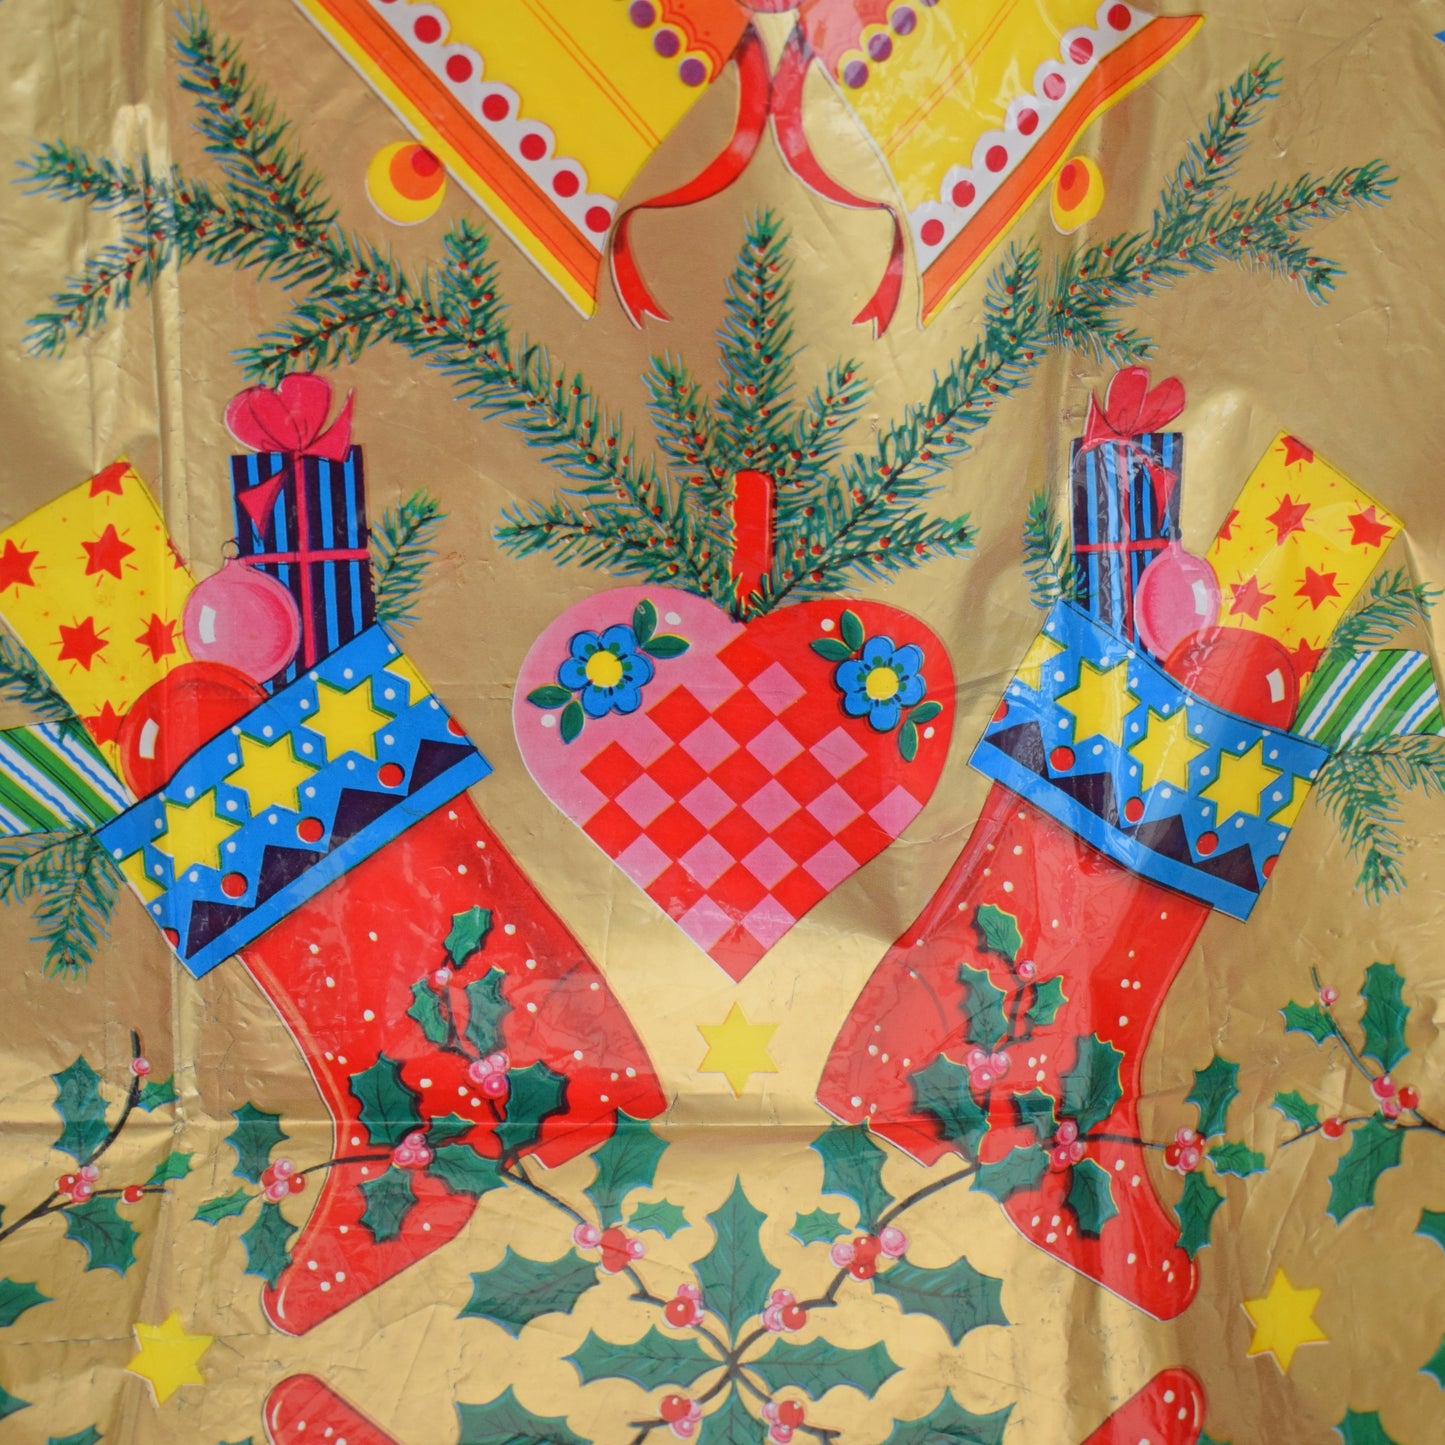 Vintage 1970s Kitsch Christmas Plastic Tablecloth- Large